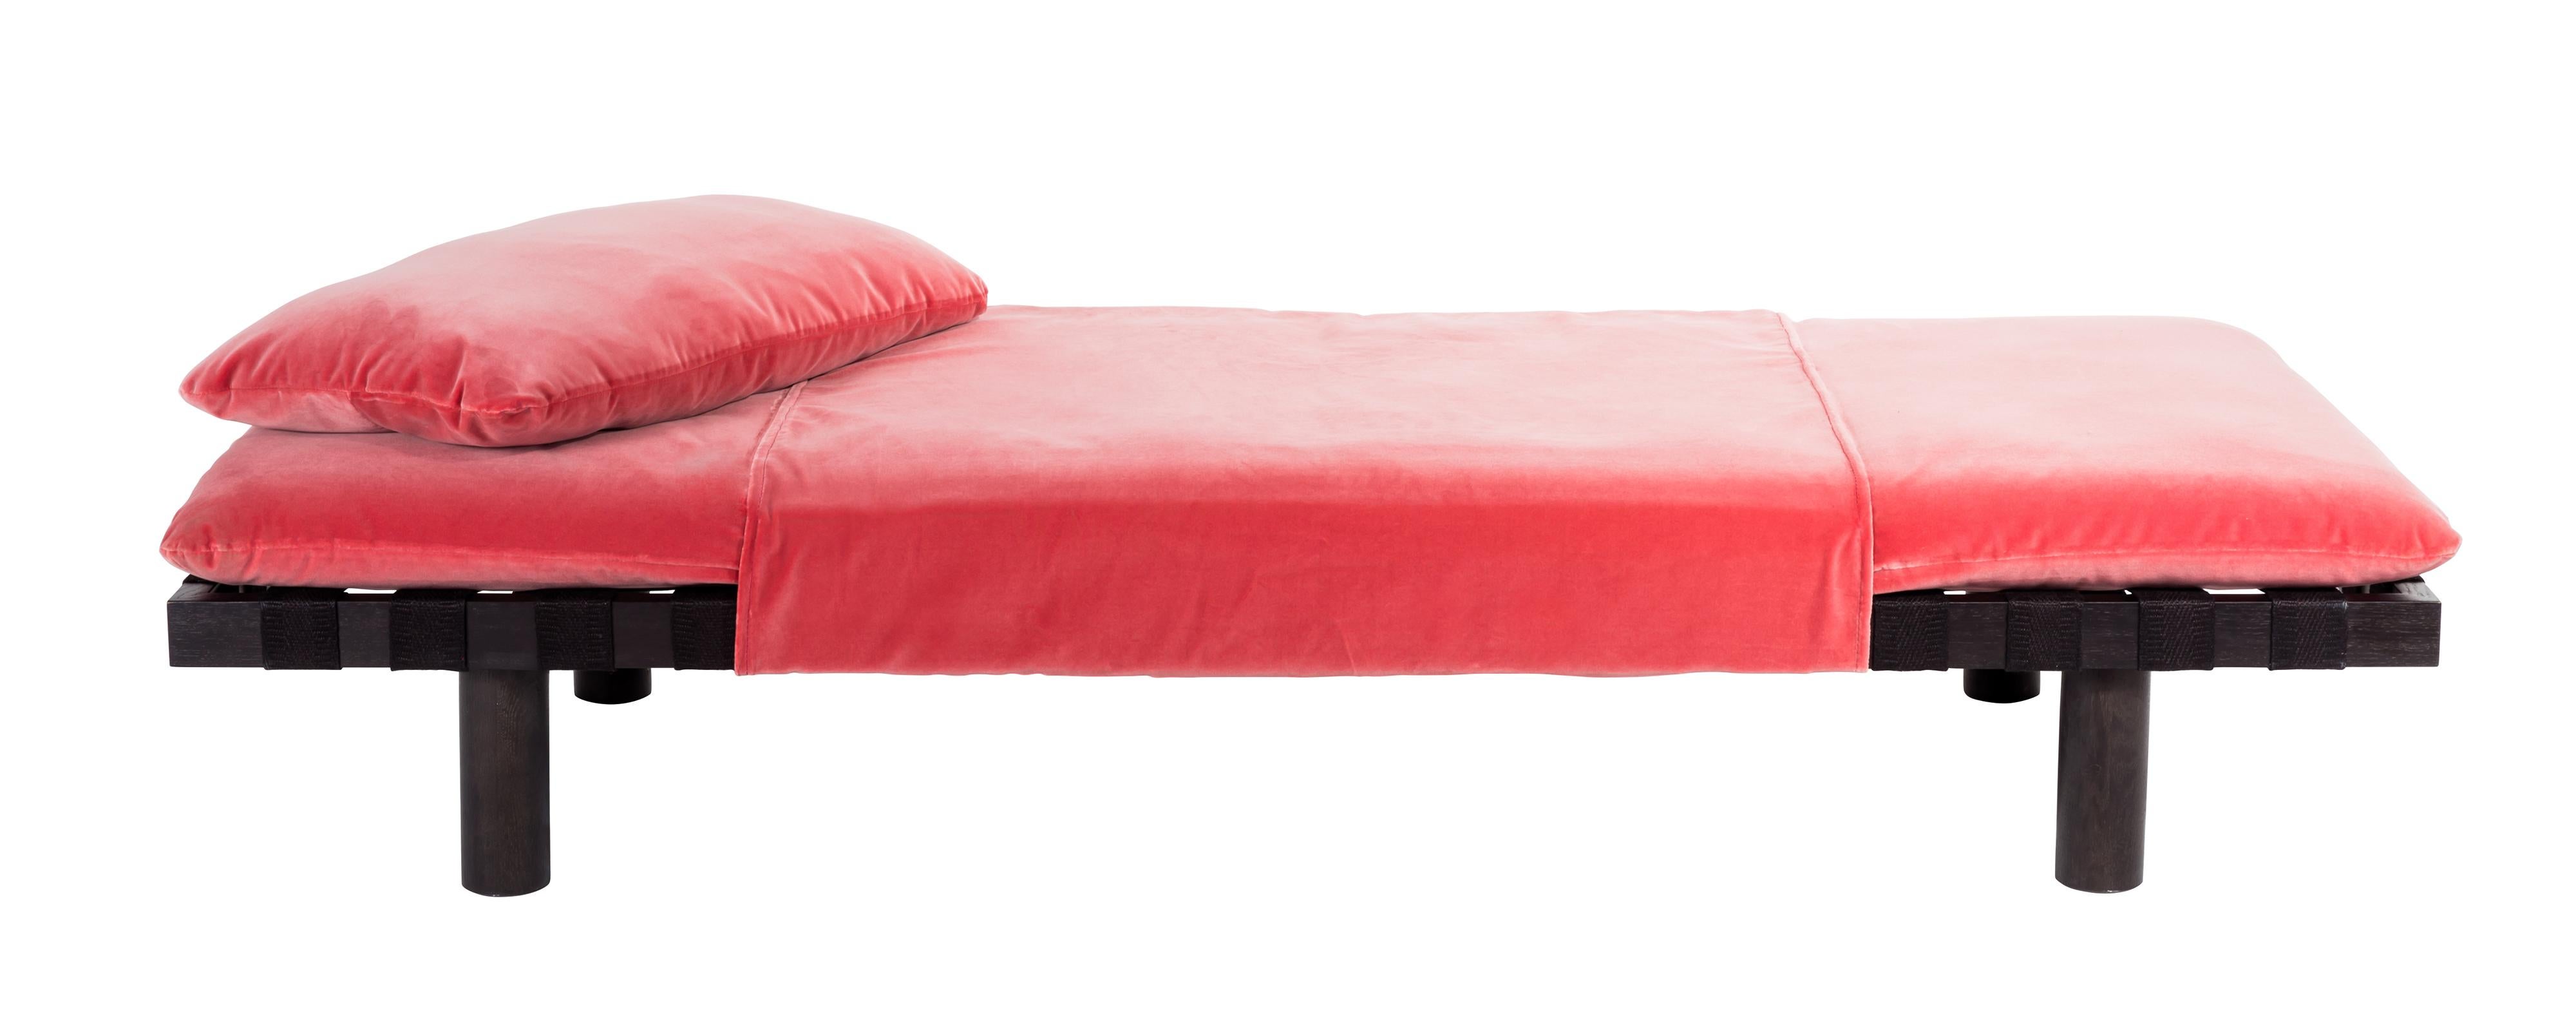 Pallet dirty pink velvet black day bed by Pulpo
Dimensions: D200 x W80 x H29 cm
Materials: fabric/leather, foam and wood

Also available in different colours and finishes. 

Thinking about the first significant furniture for pulpo with the